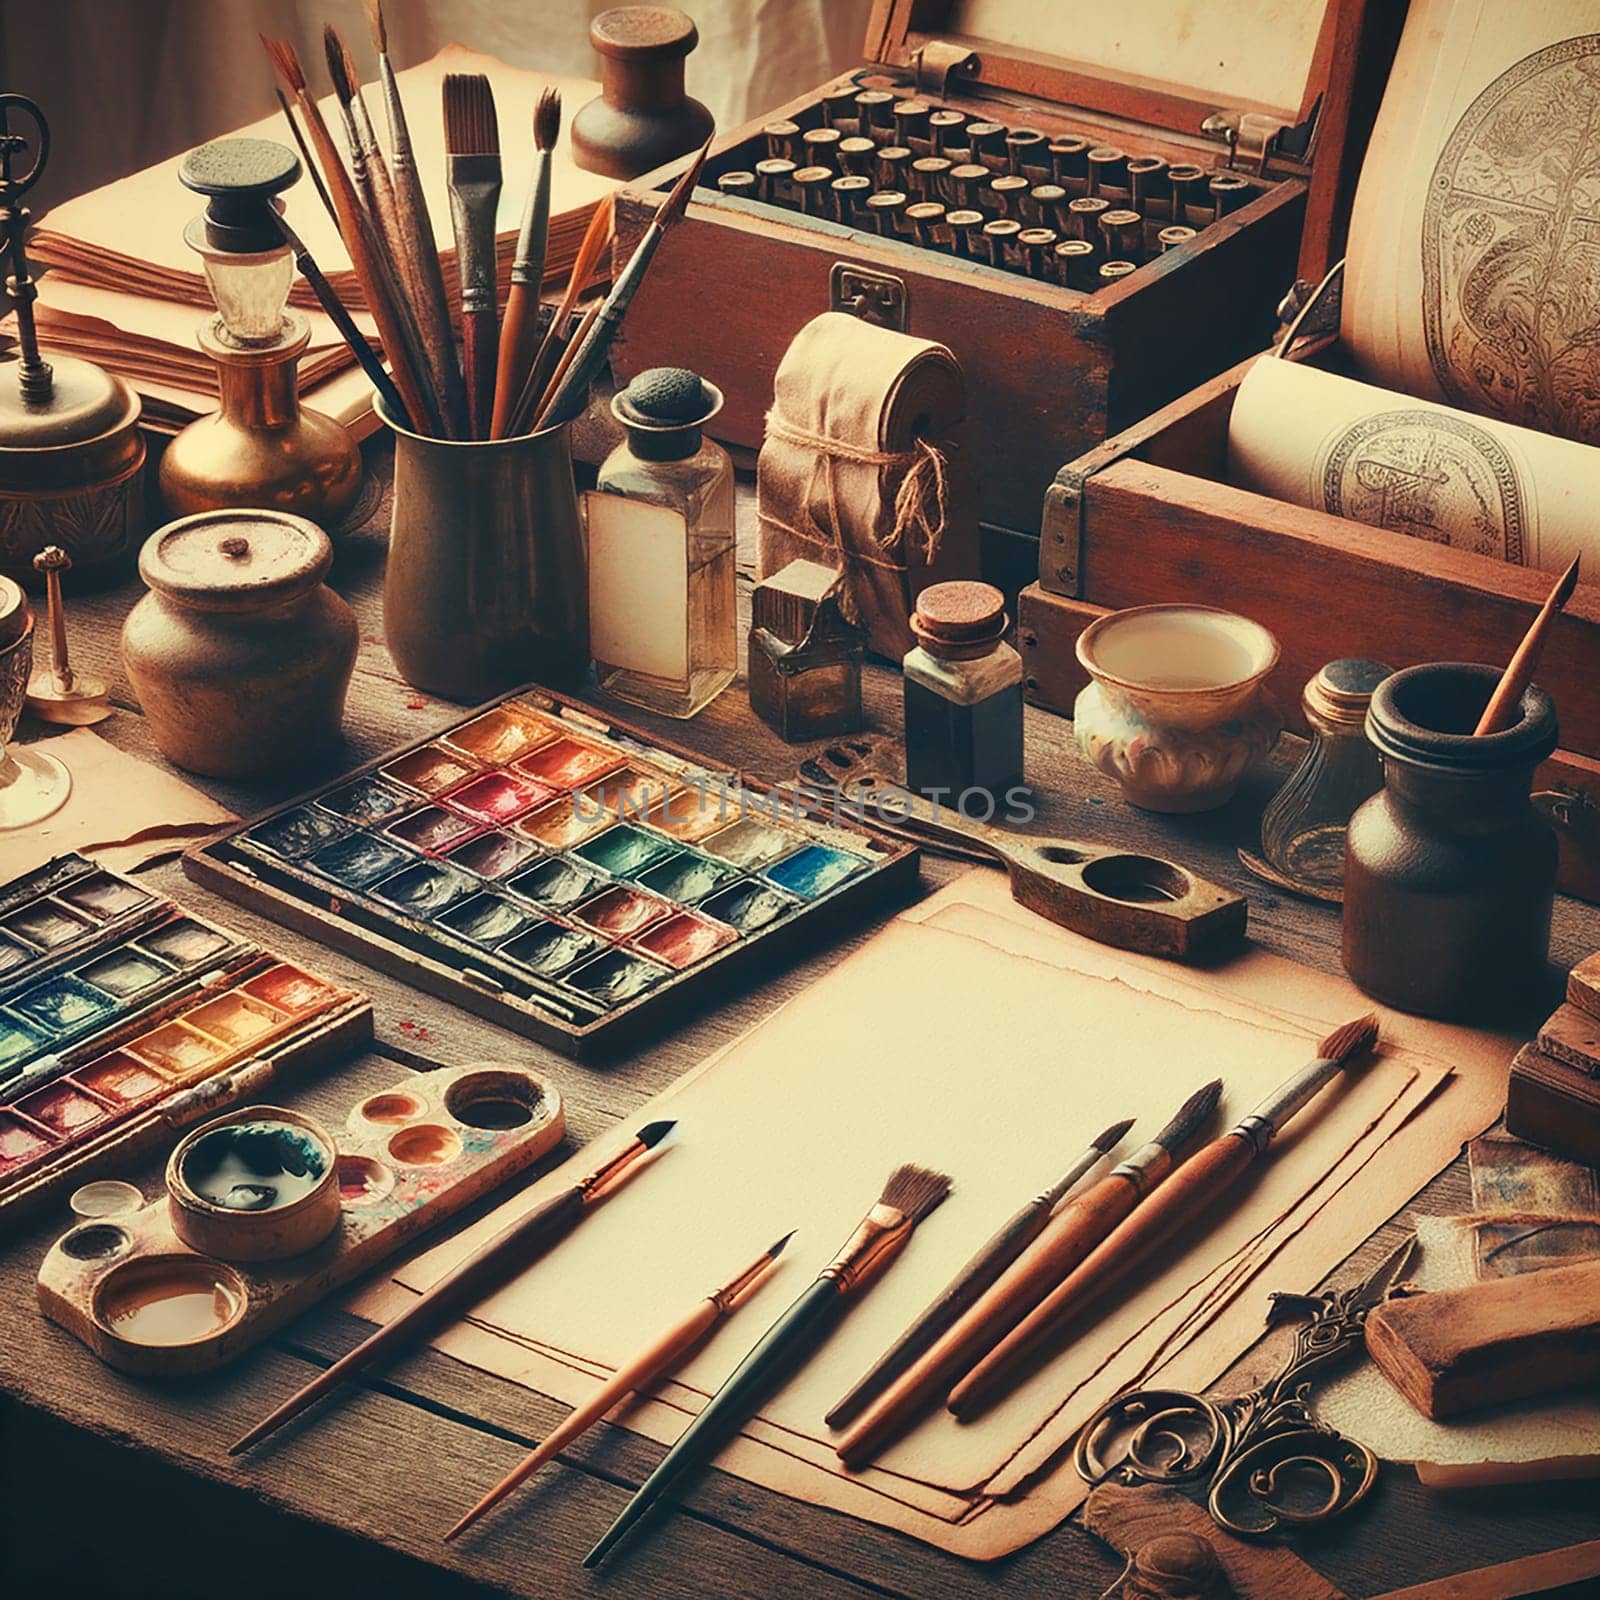 Creative Oasis: Watercolor Brushes, Paper, and Painting Tools in Action by Petrichor